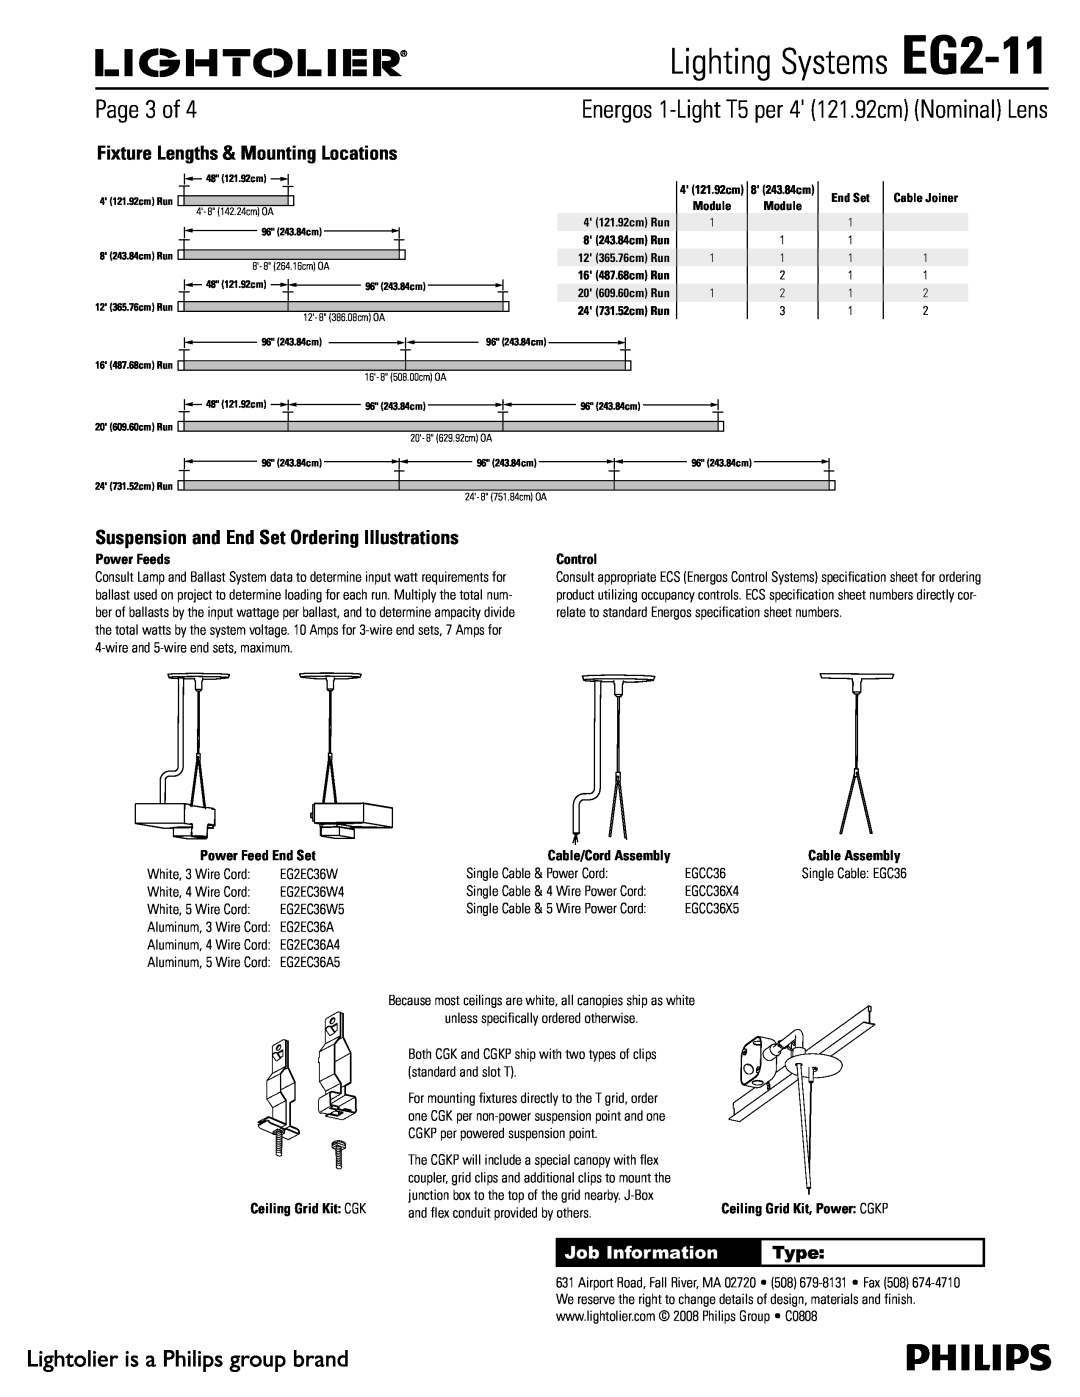 Lightolier Lighting Systems EG2-11, 1BHFPG, Job Information, Type, End Set, Cable Joiner, Cable/Cord Assembly 